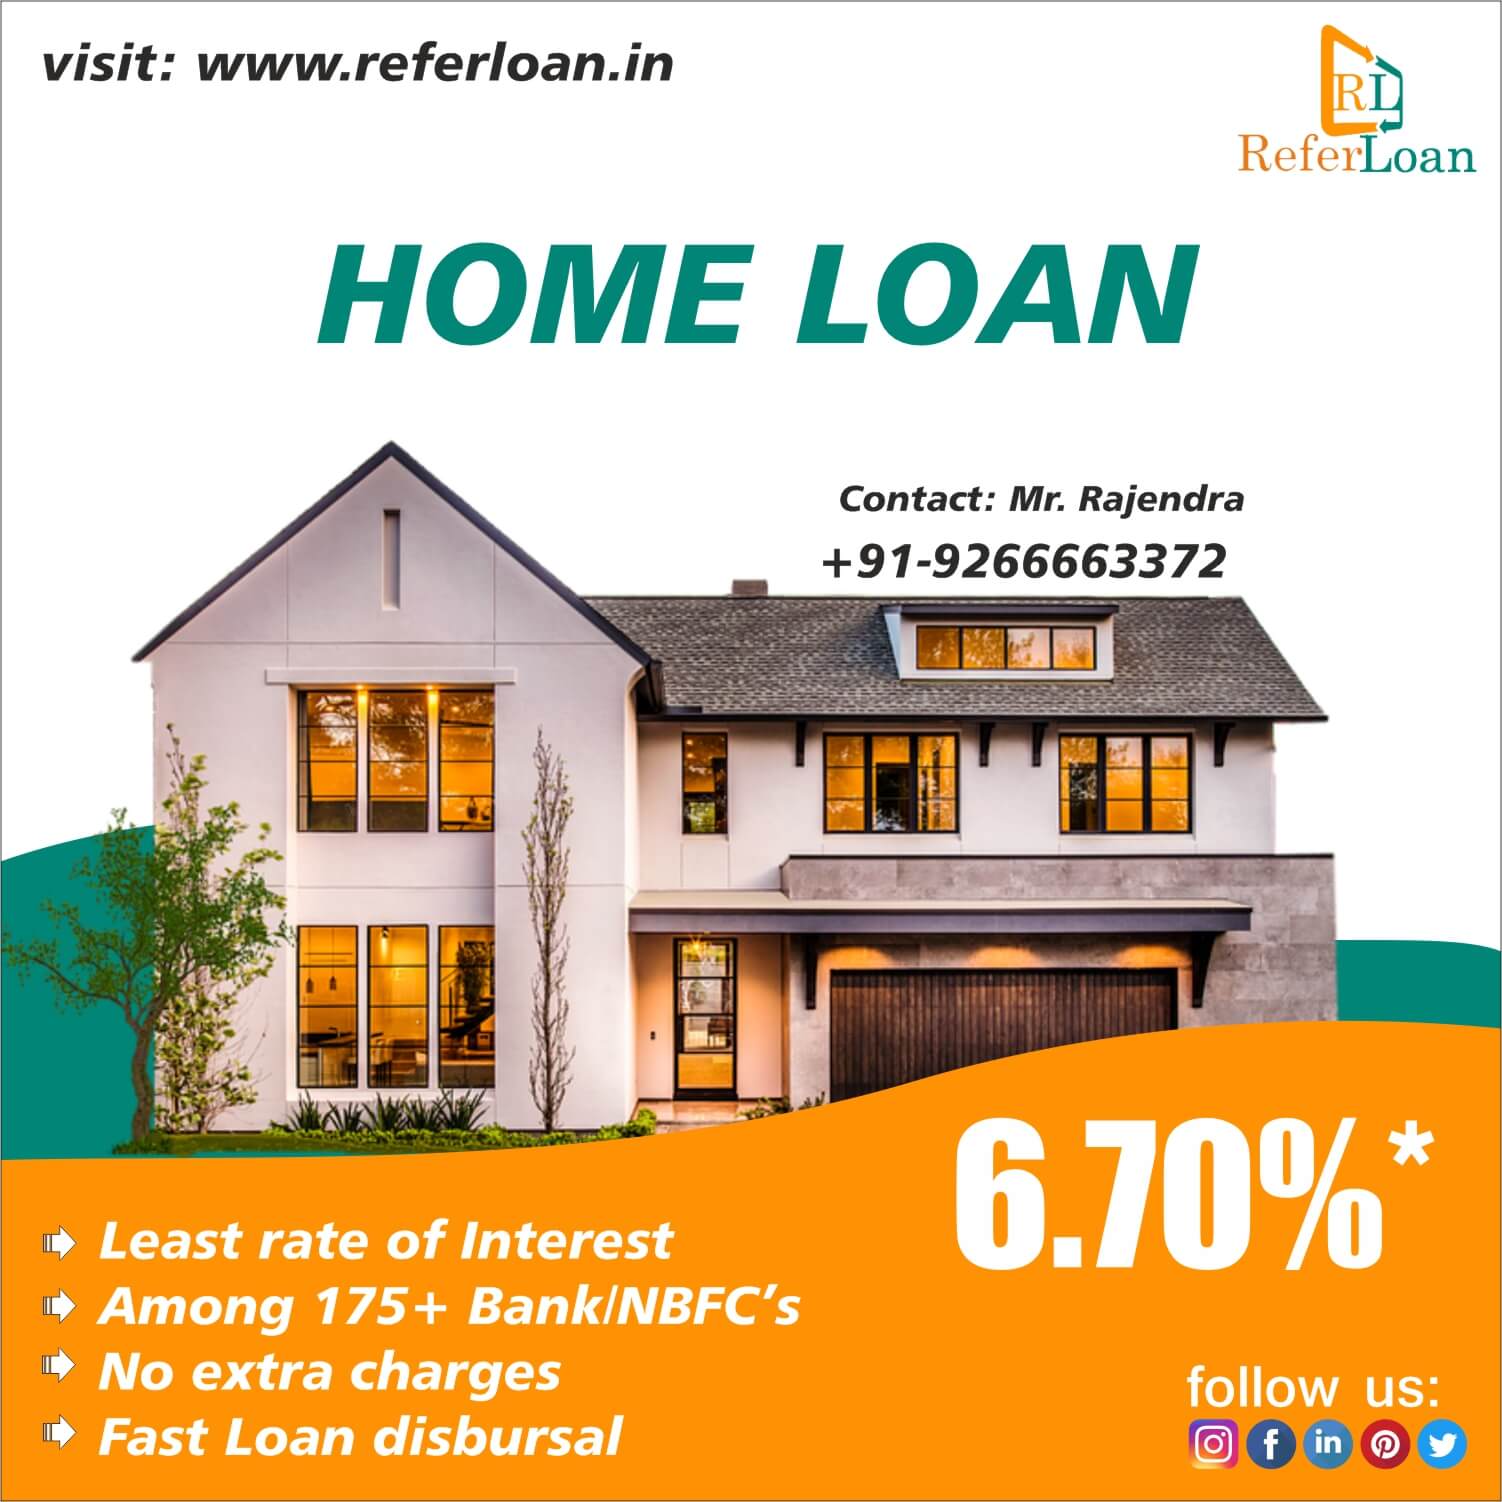 ReferLoan can be a good idea when you use it to reach a home loan goal.